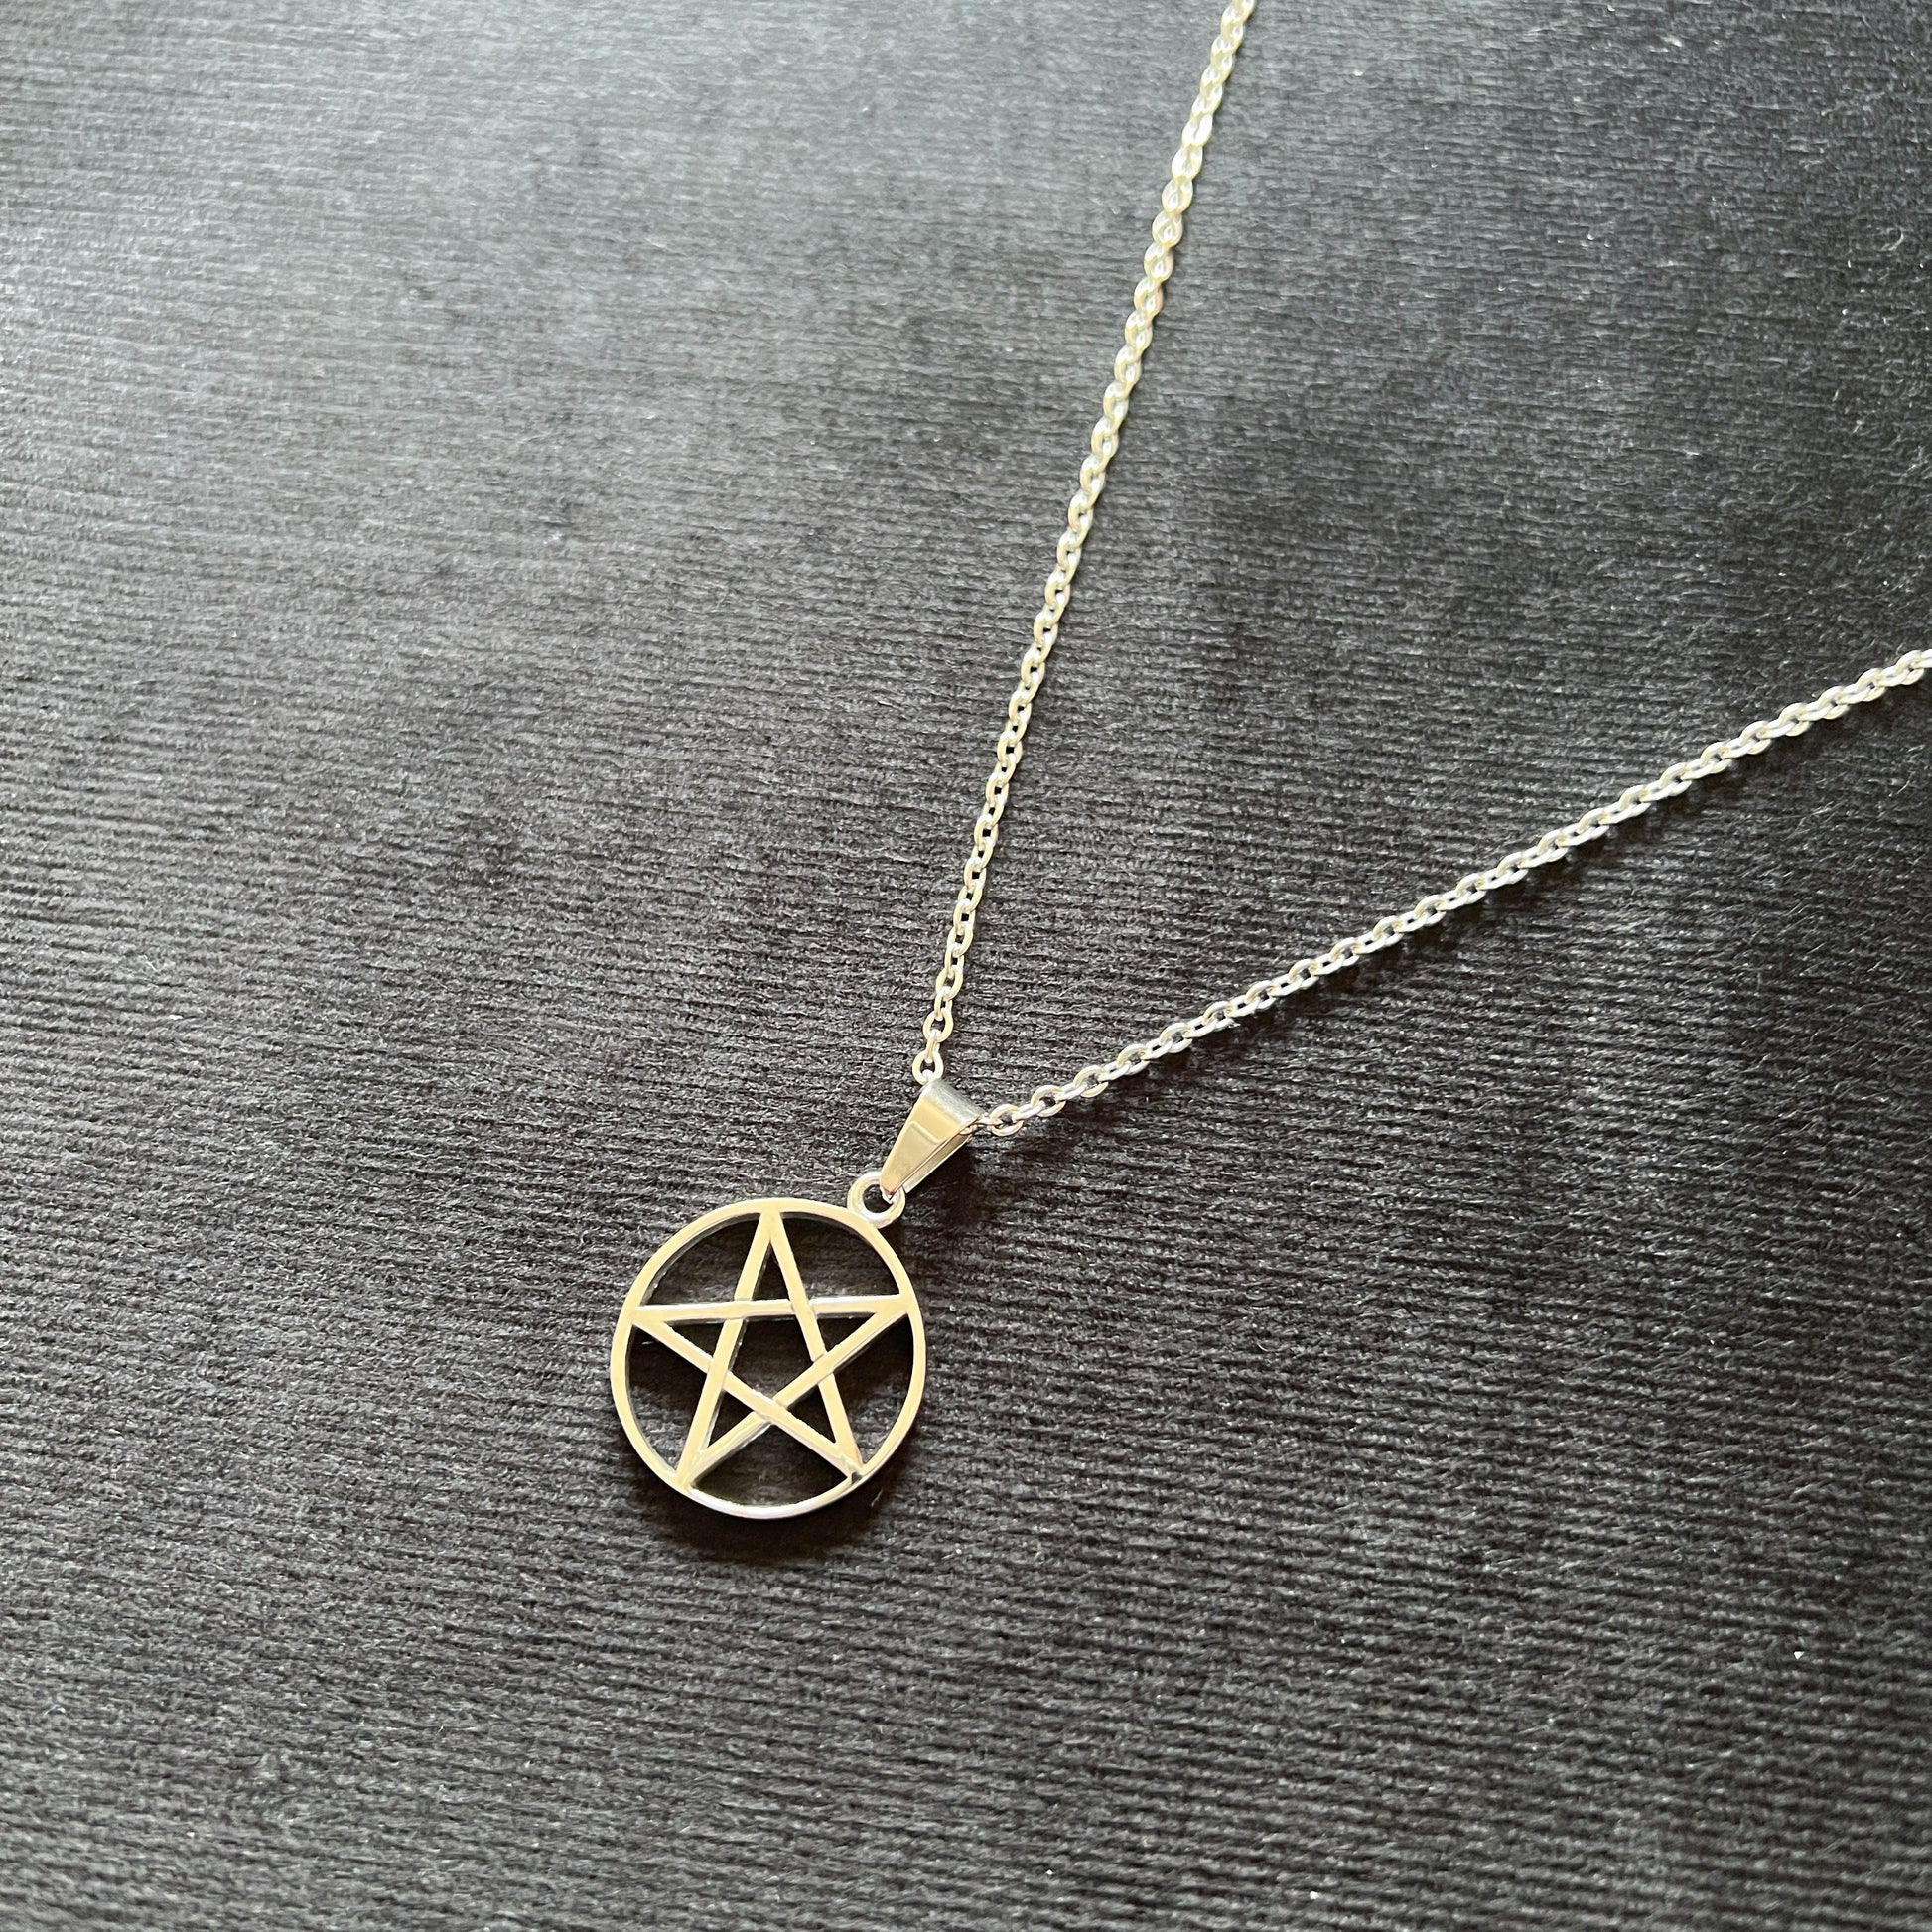 Stainless steel reversed pentacle necklace witch jewelry occult inverted pentacle necklace